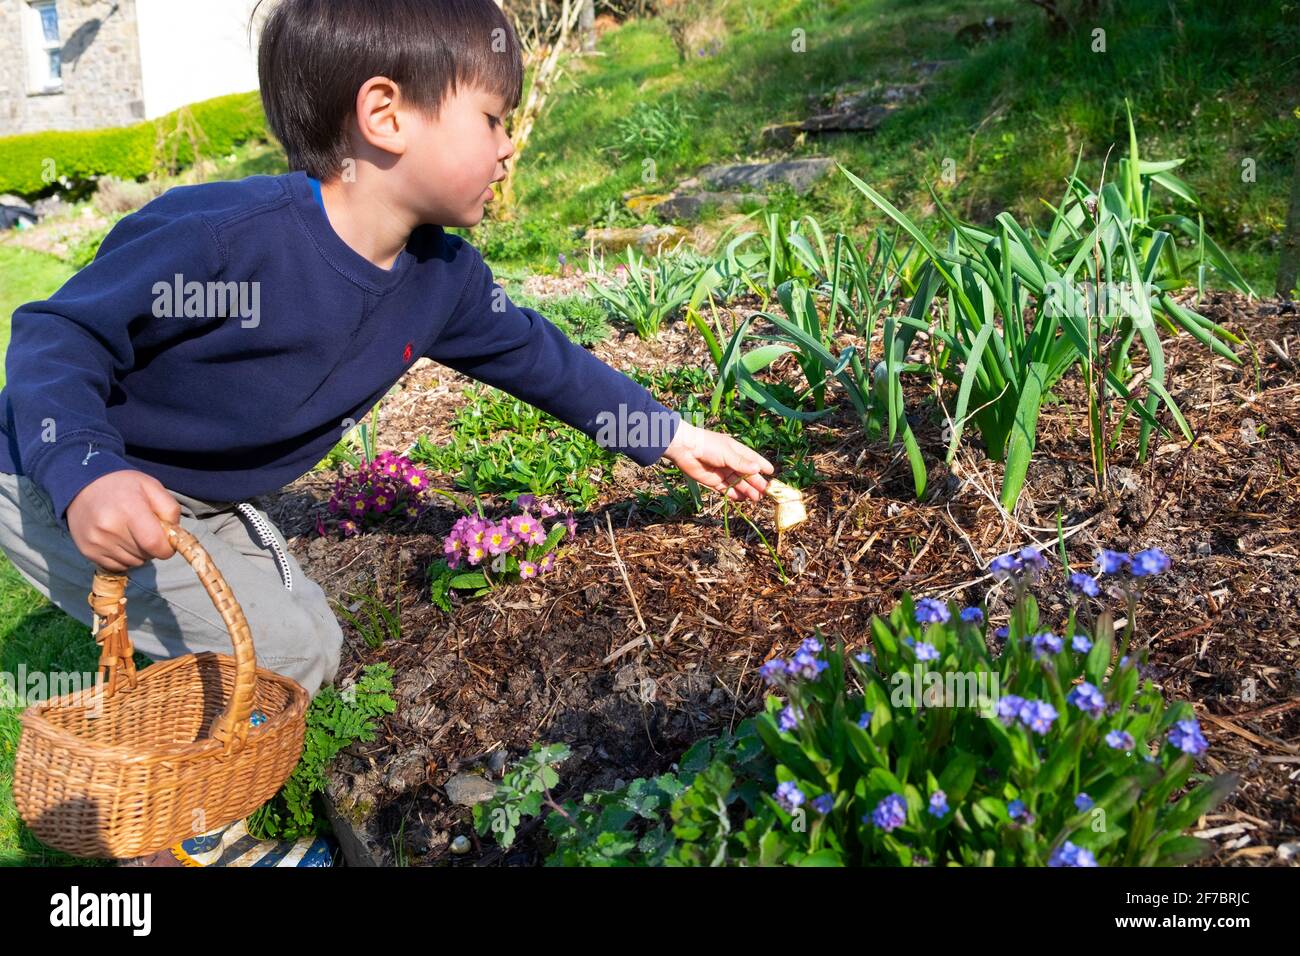 Child boy 4 yrs holding basket reaching for chocolate rabbit in flower garden on Easter egg hunt Carmarthenshire Wales UK Great Britain   KATHY DEWITT Stock Photo